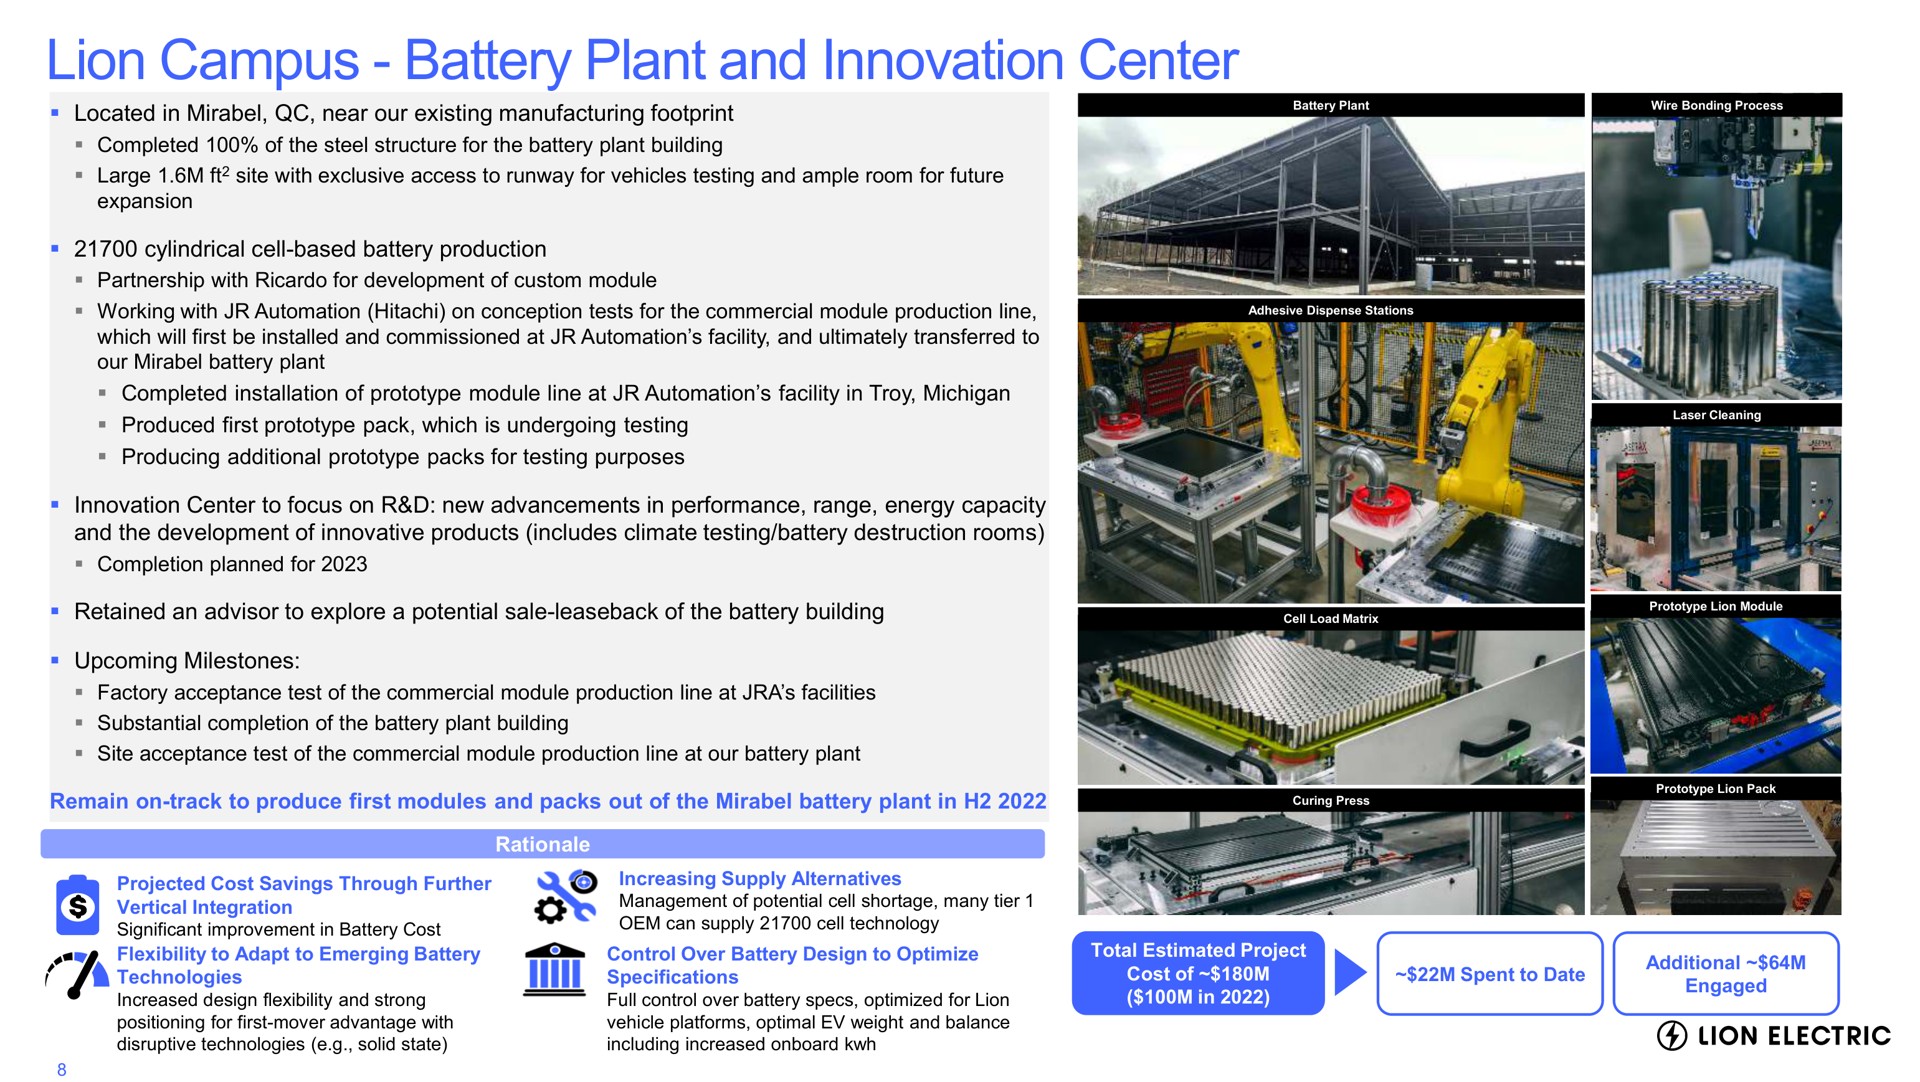 lion campus battery plant and innovation center electric | Lion Electric